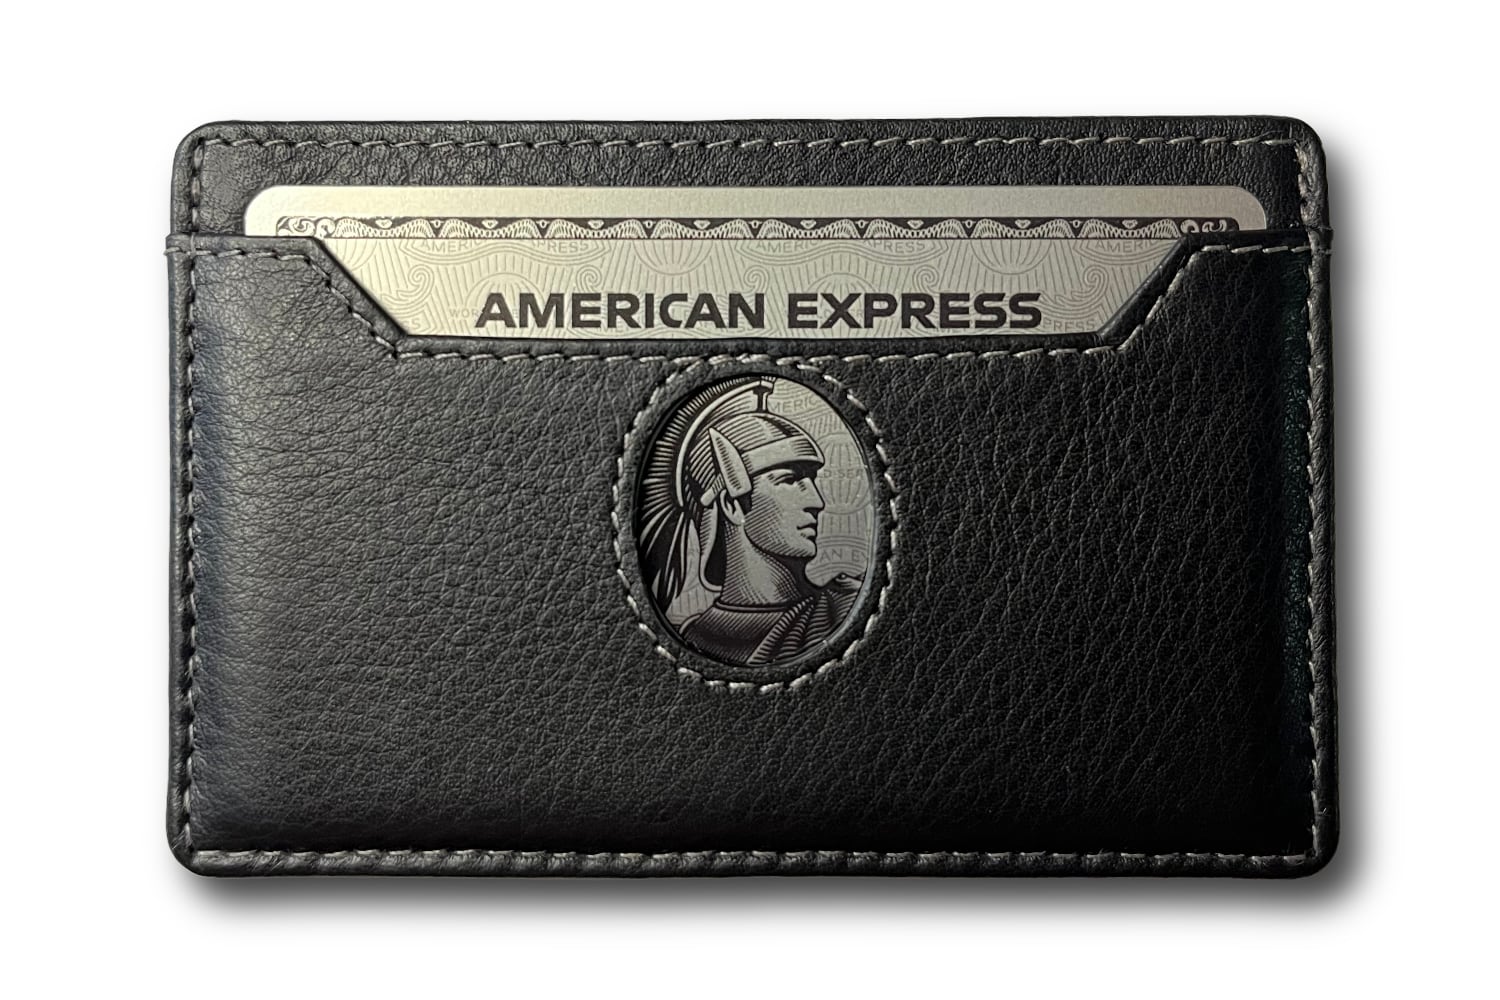 2-card Mini Card Holder Smallest Minimalist Wallet Compatible with Amex Platinum